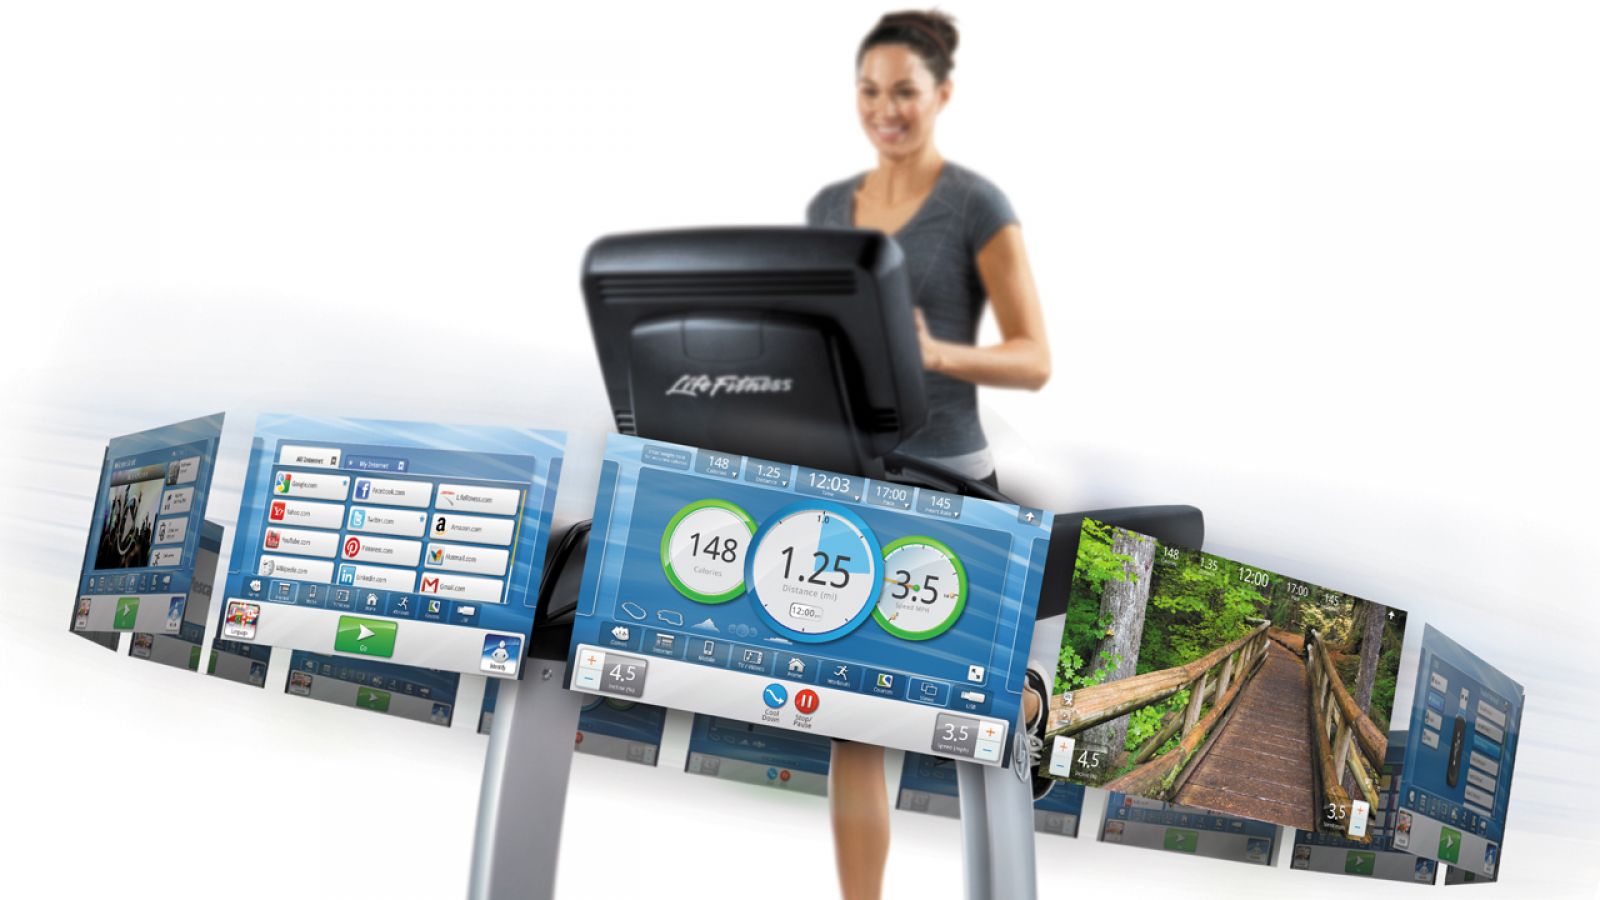 Life Fitness Discover User Interface